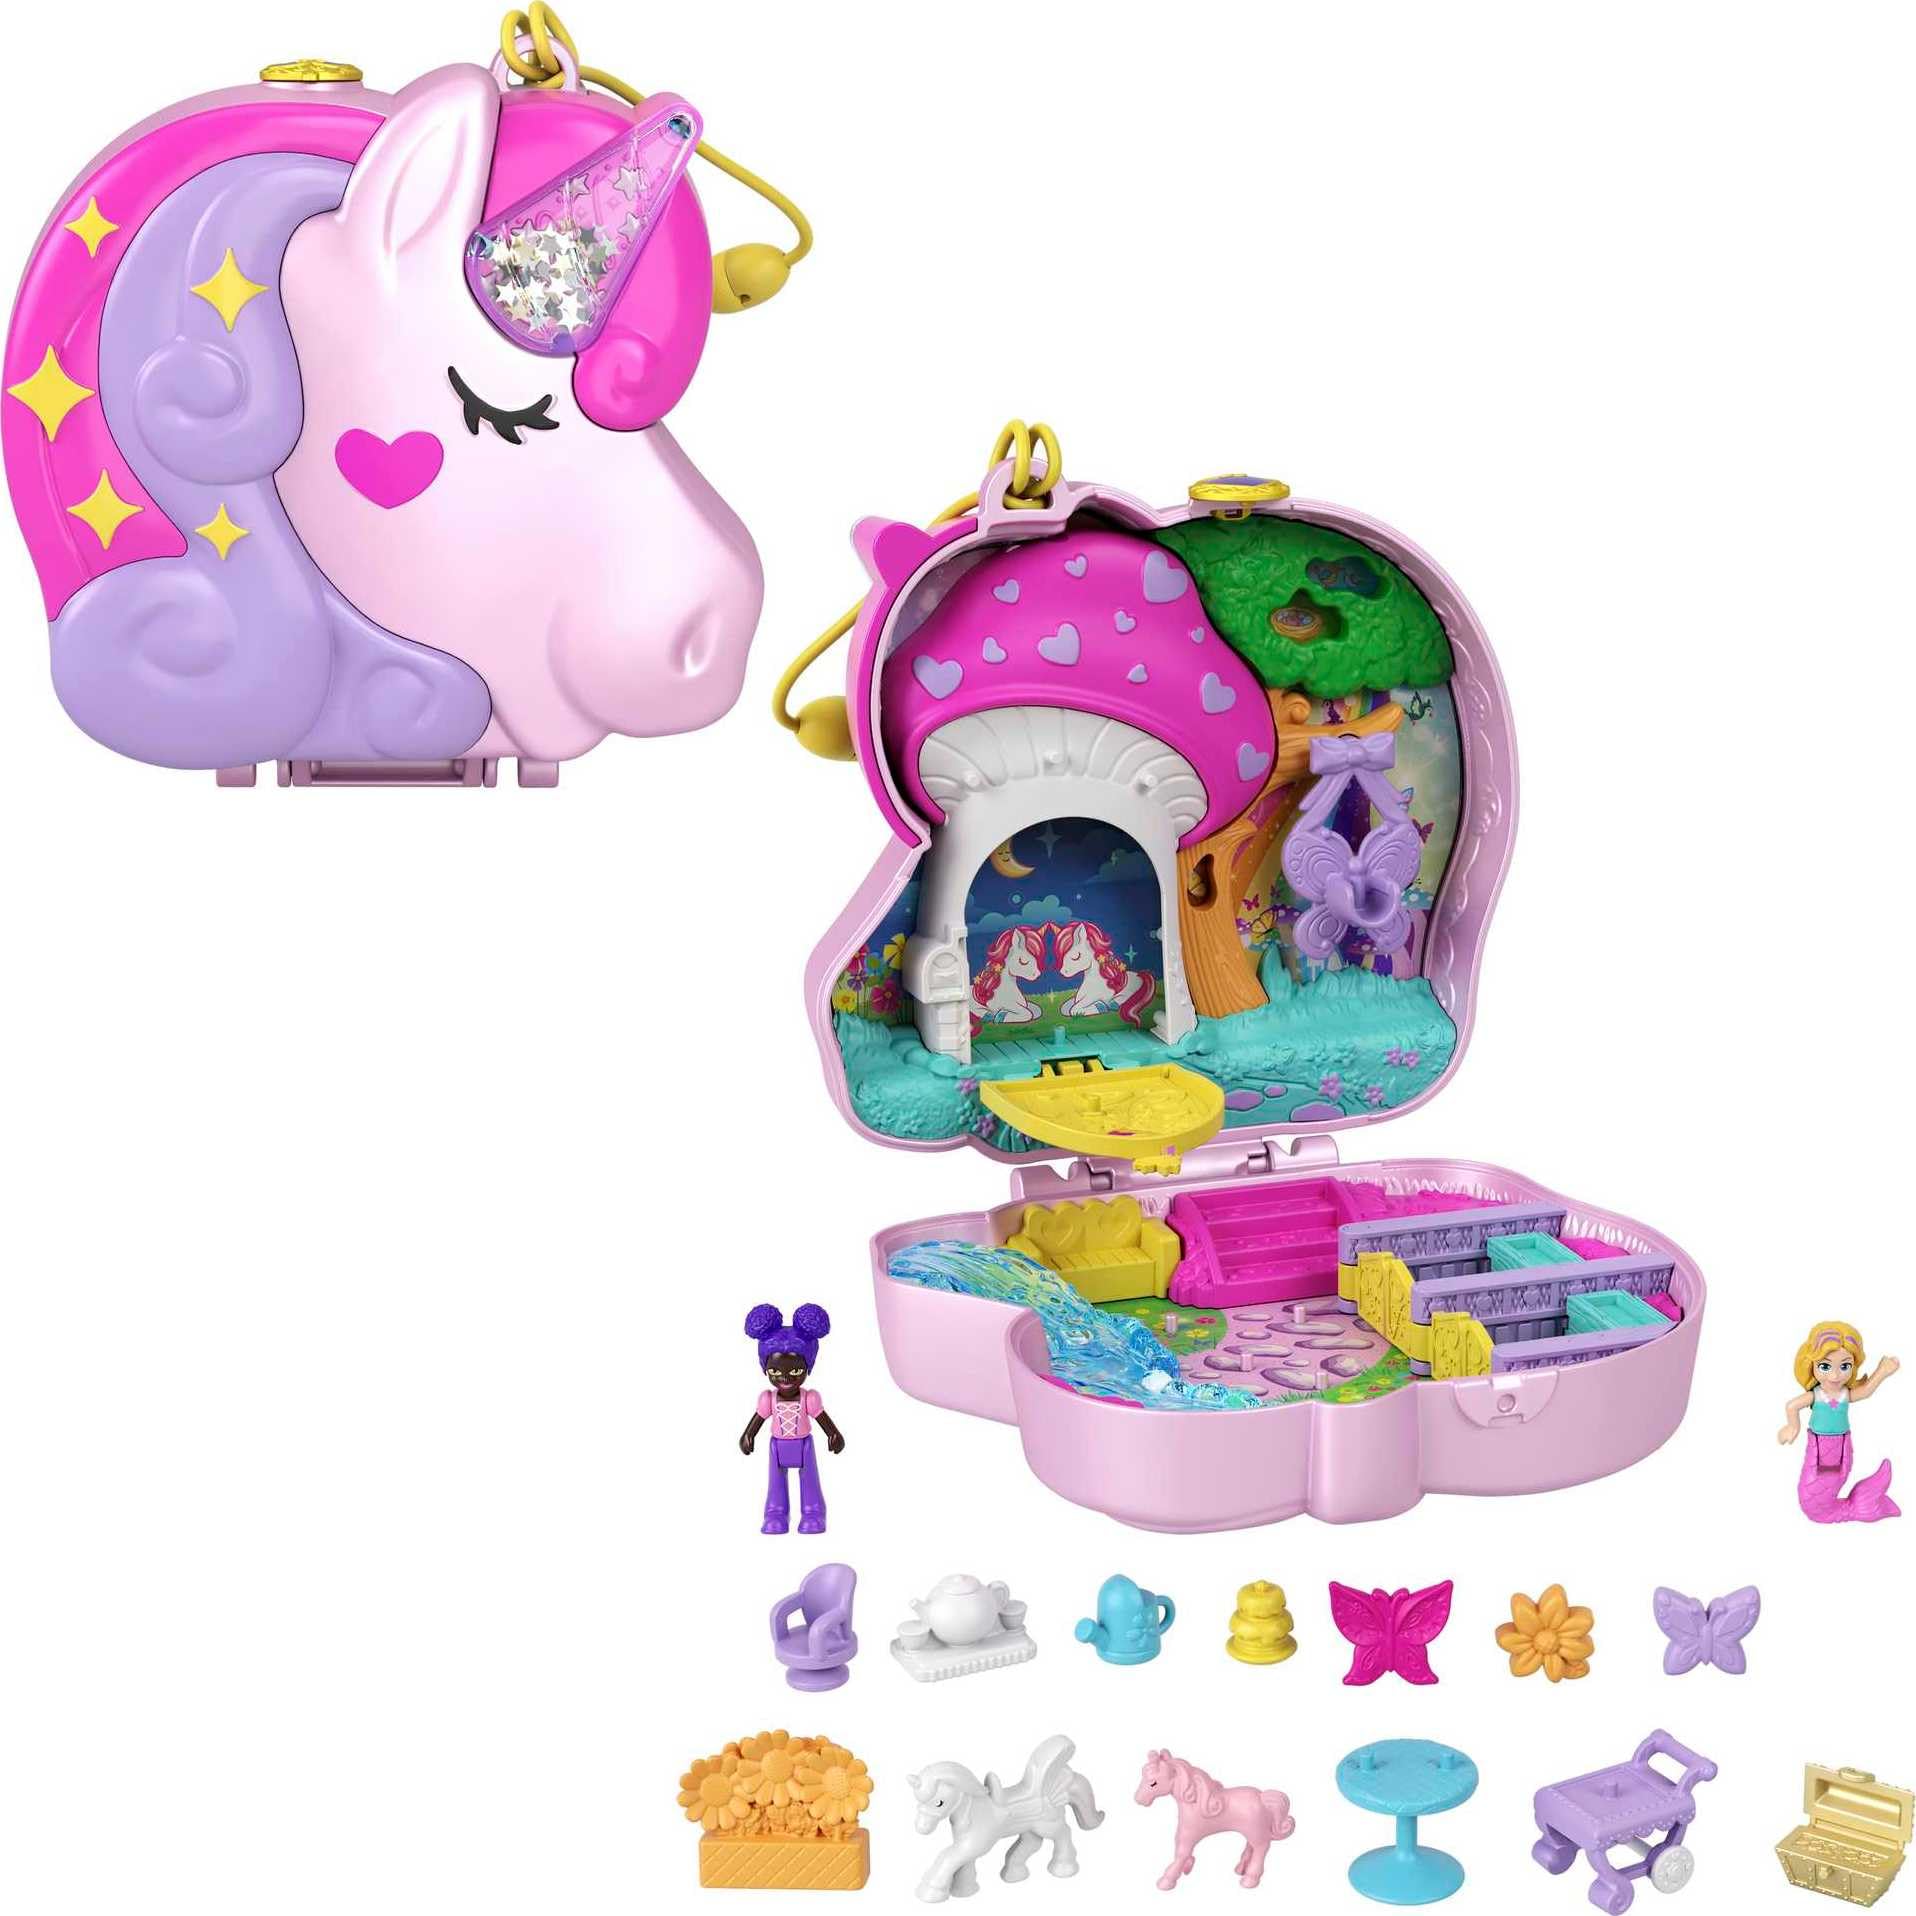 Polly Pocket Unicorn Tea Party Compact Playset $9.99 + Free Shipping w/ Prime or on $35+